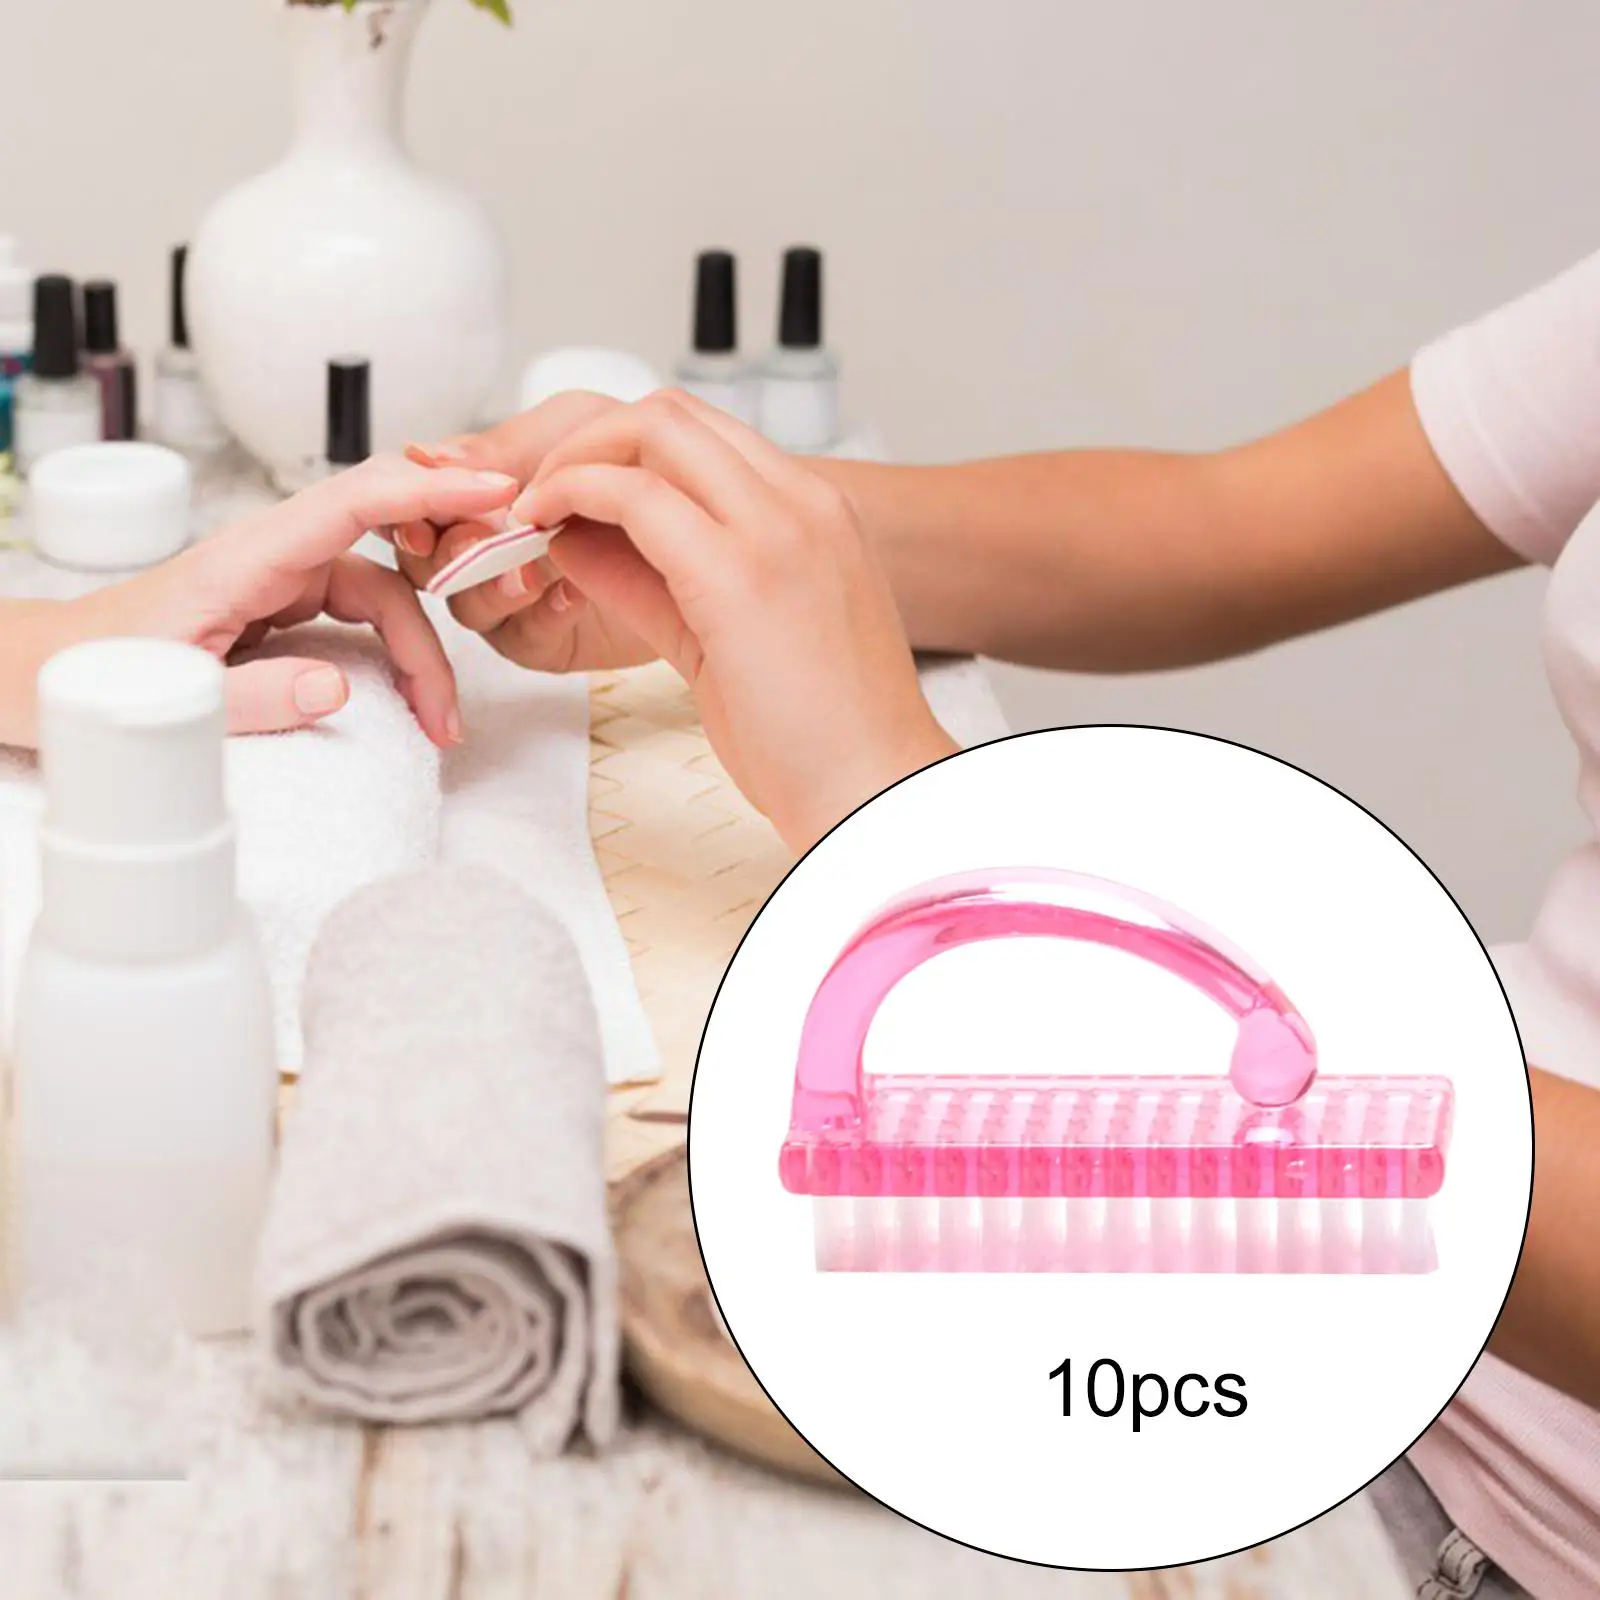 10 Pieces Handle Grip Nail Brush Dust Powder Clean Beauty Soft Nail Brushes Nail Art Tools for Toes Nails Cleaner Care Tool Kids